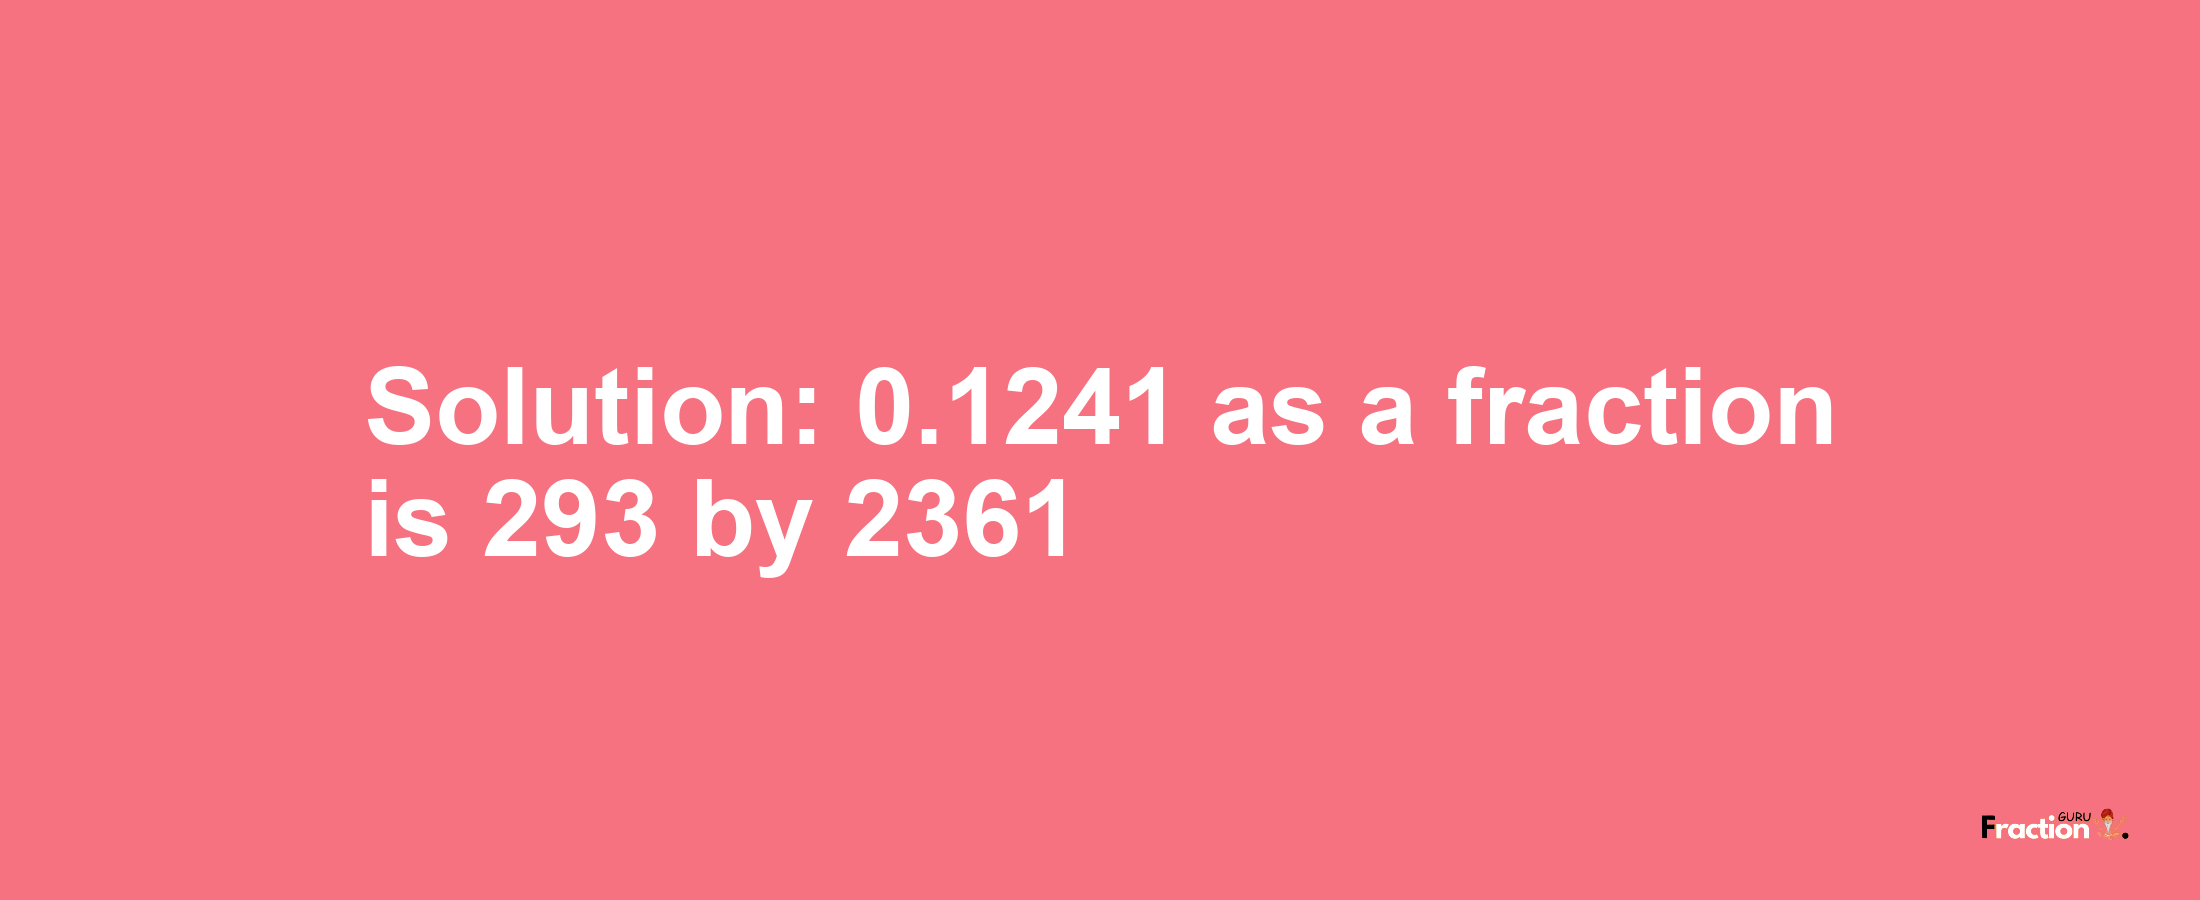 Solution:0.1241 as a fraction is 293/2361